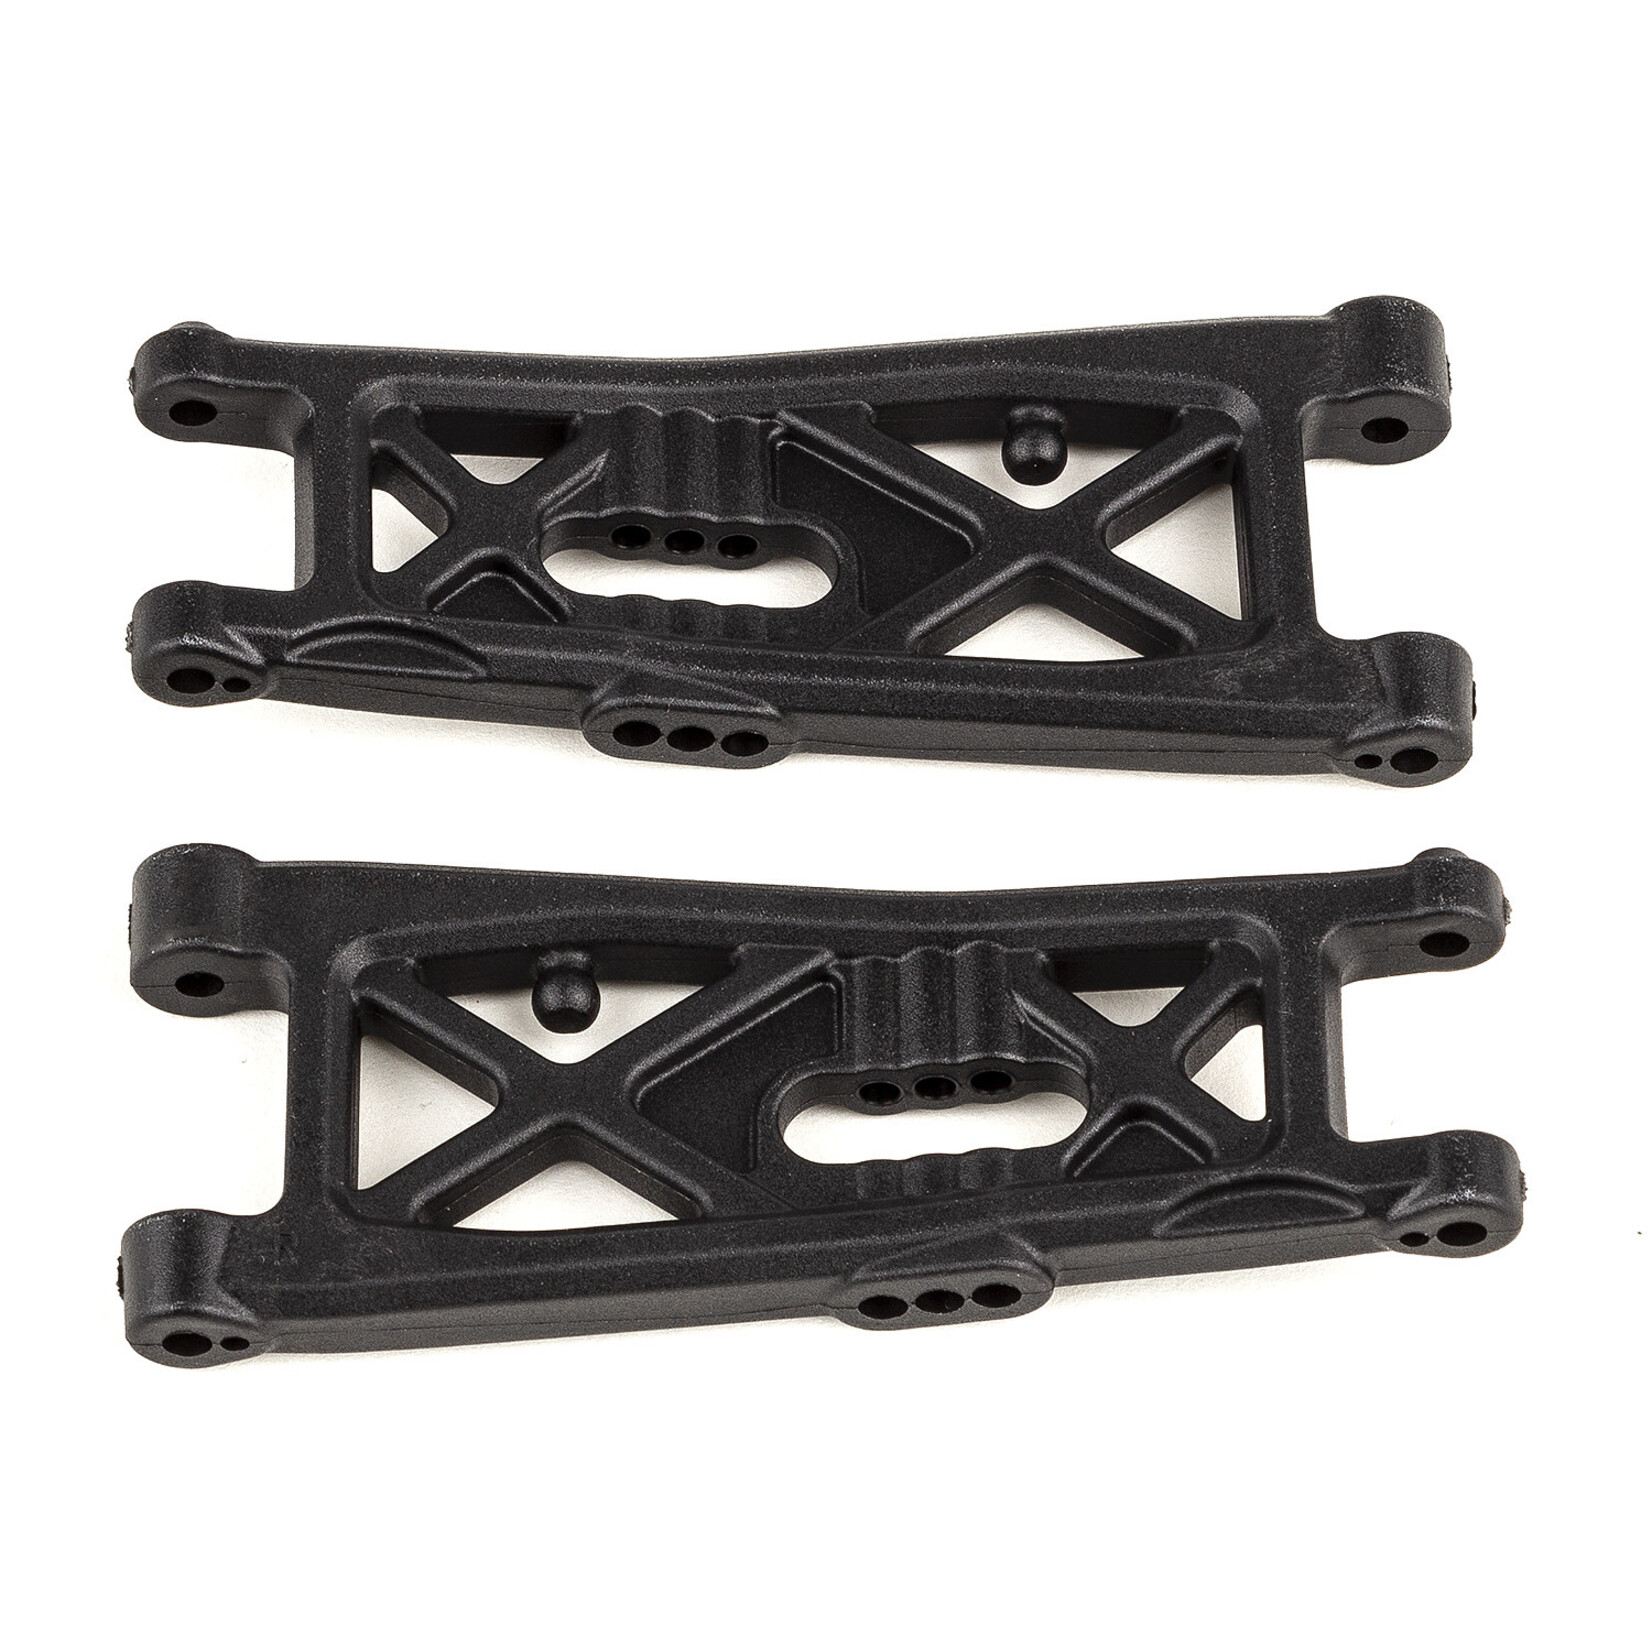 Team Associated Team Associated RC10B7 Front Suspension Arms (2) #92410